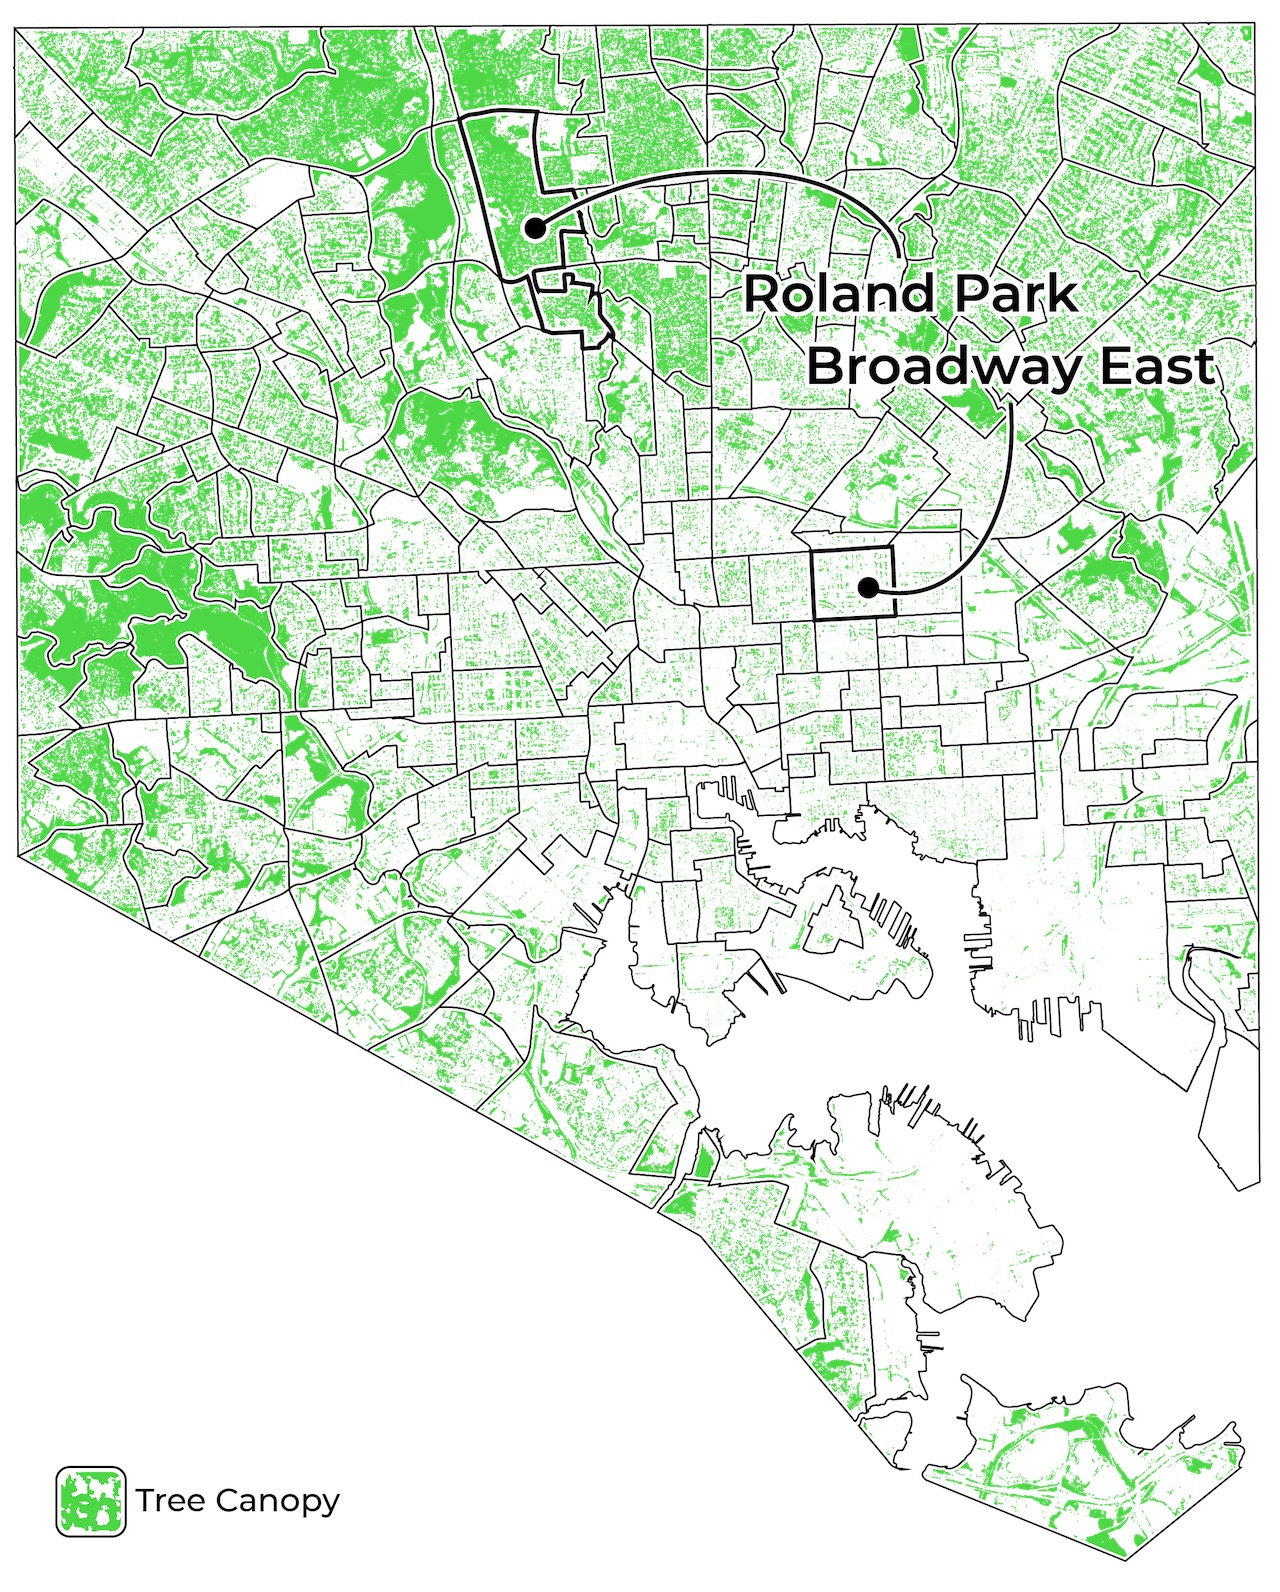 The satellite image disappears, replaced by green blotches across the city representing tree canopy.